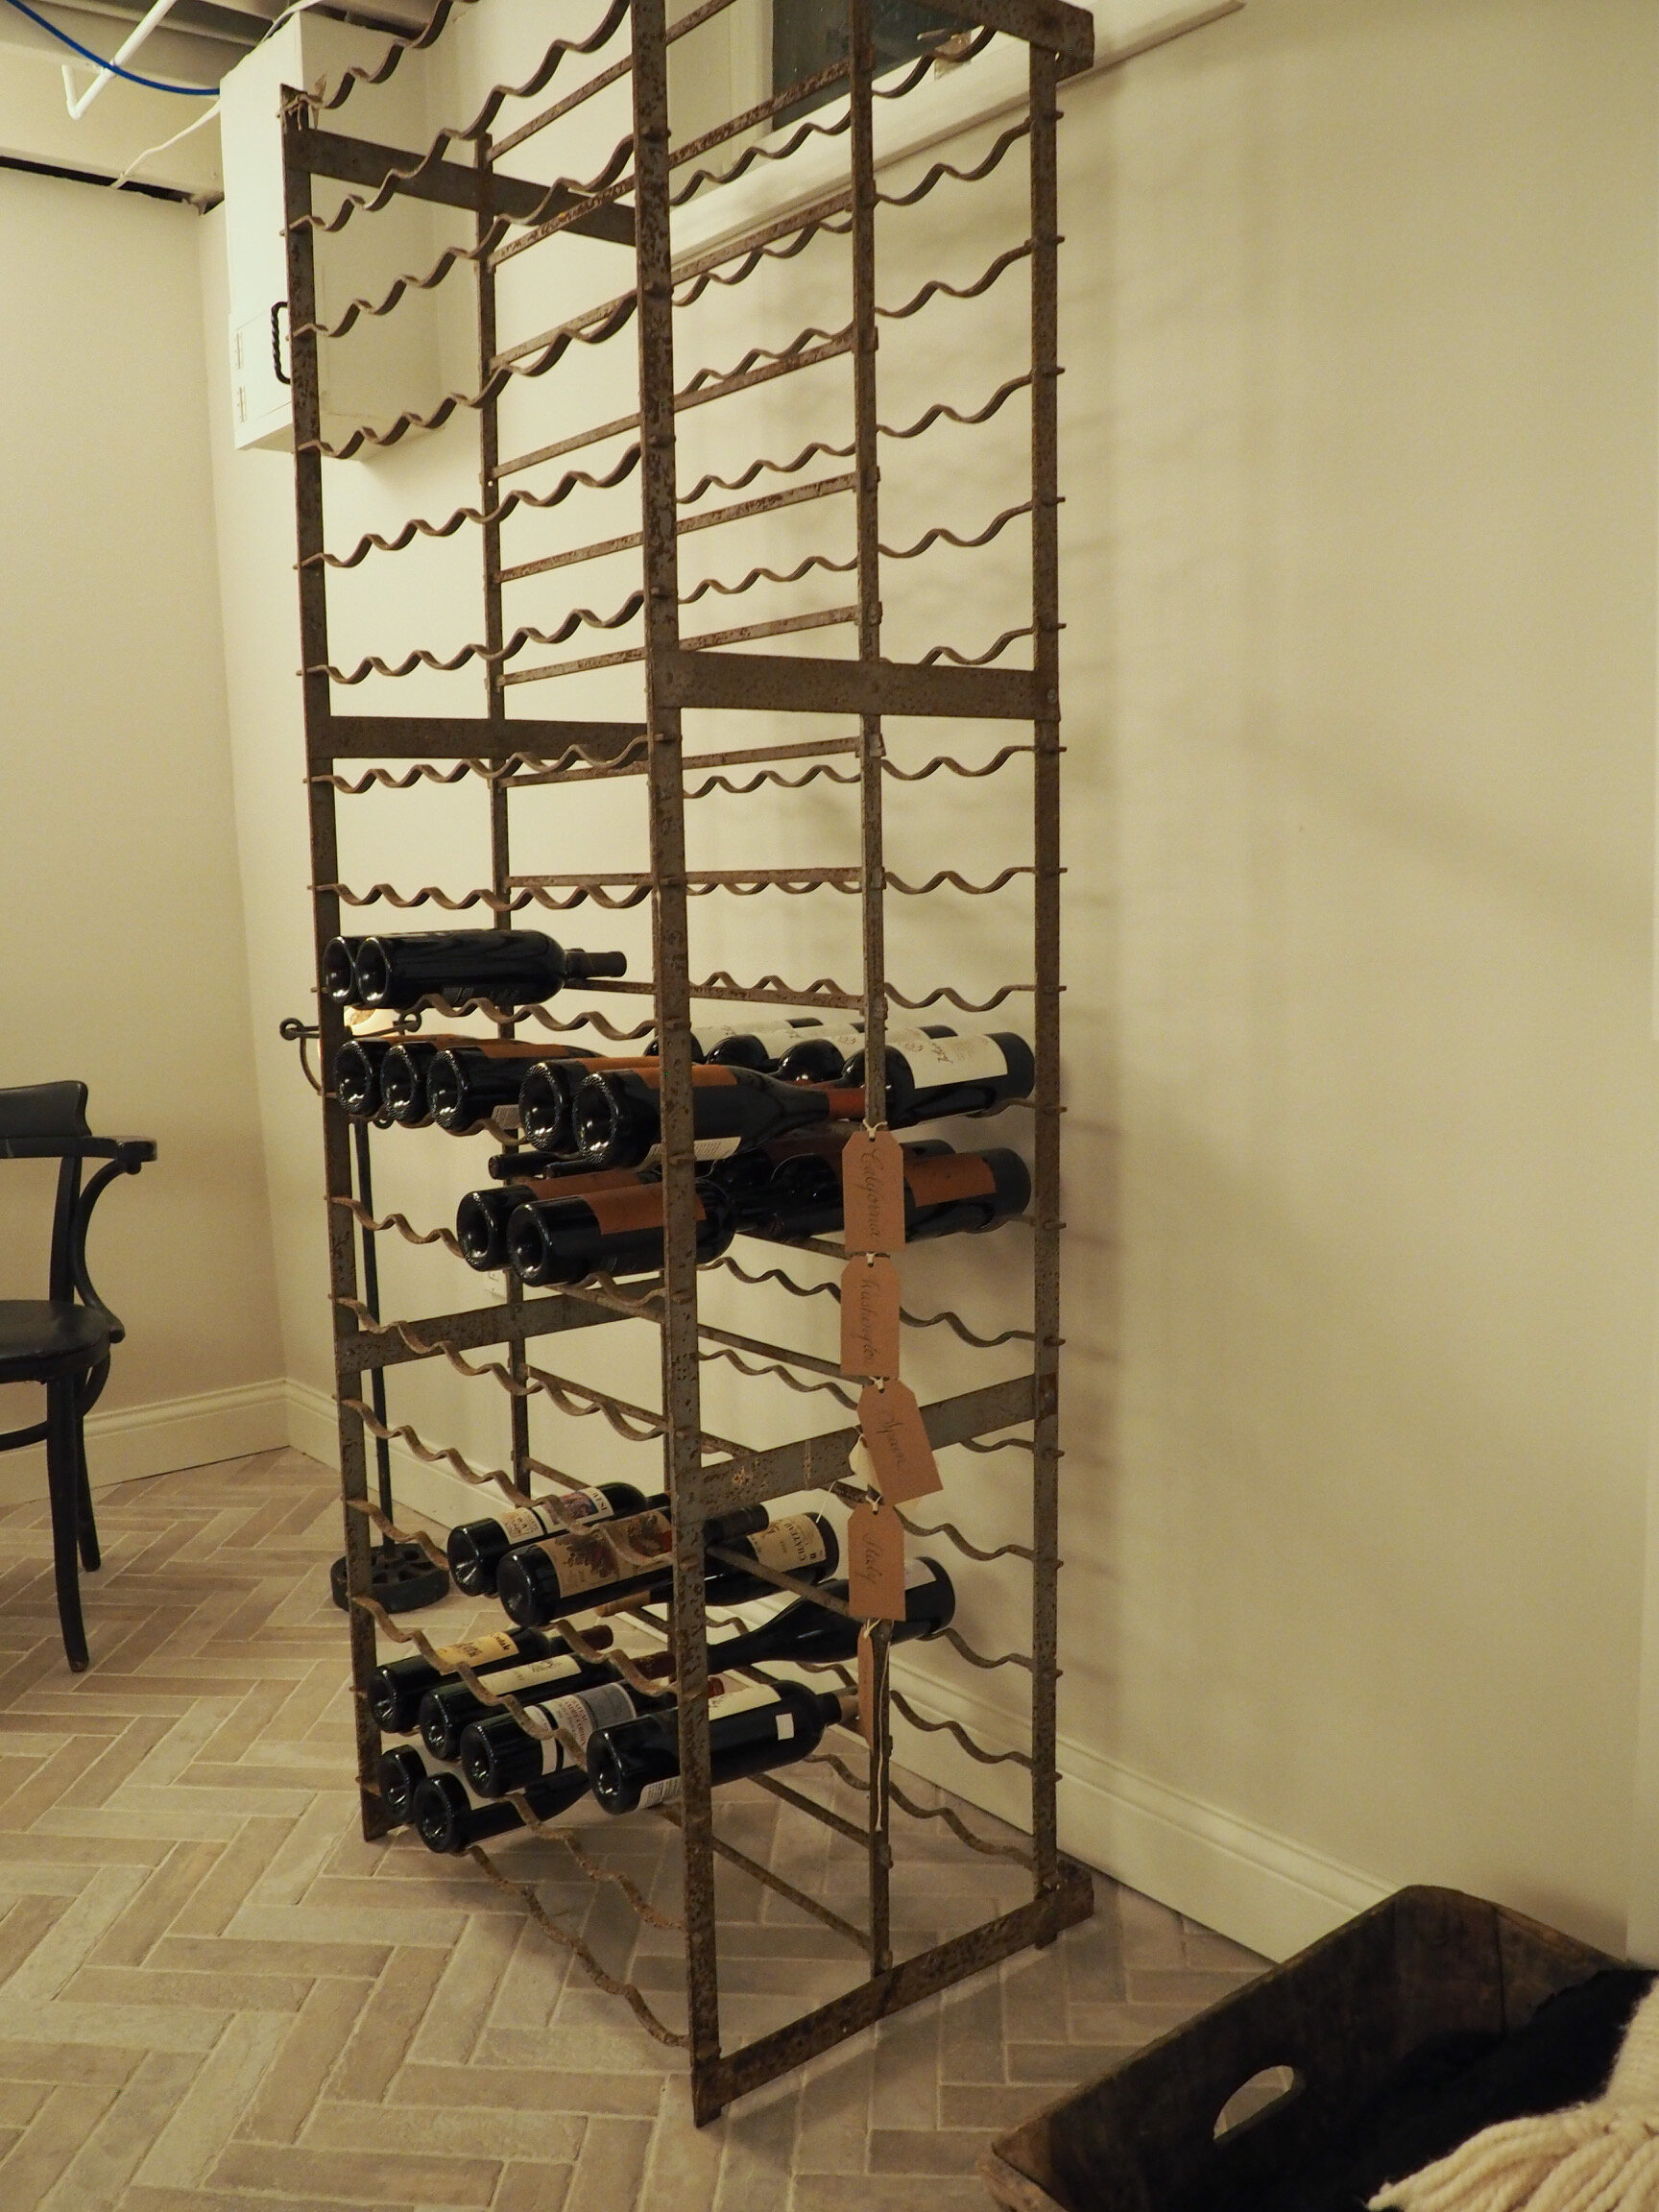 This is a 1920s vintage wine rack from France.